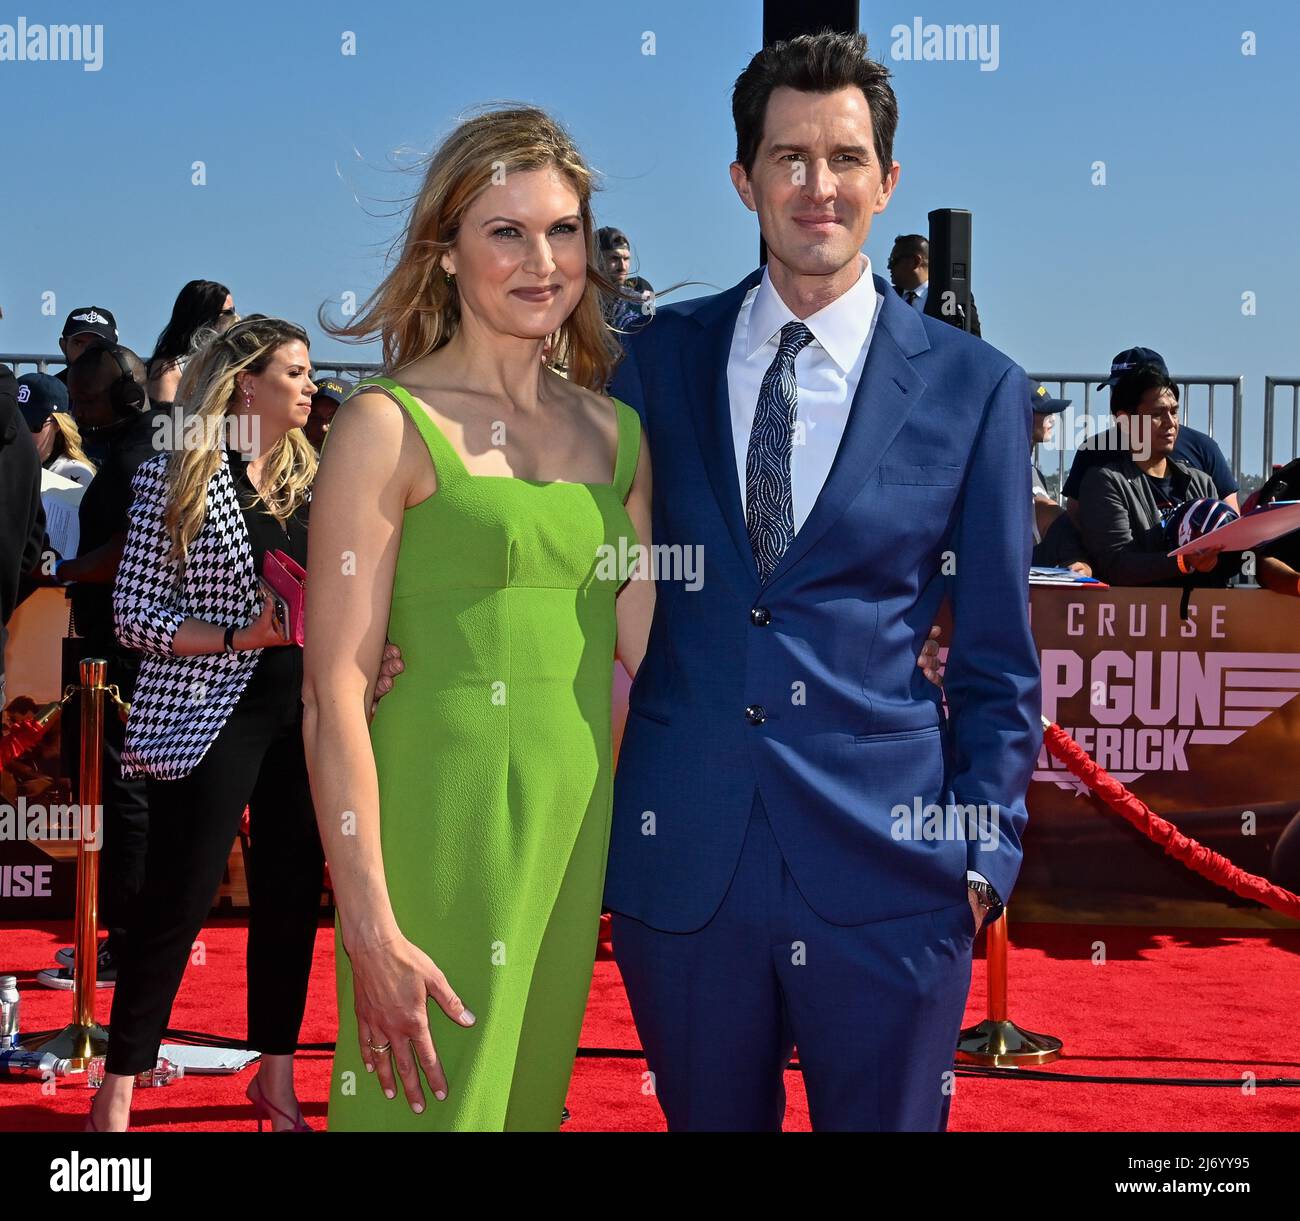 San Diego, United States. 05th May, 2022. Director Joseph Kosinski (R) and Kristin Kosinski attend the premiere of the motion picture drama 'Top Gun: Maverick' at the USS Midway in San Diego, California on Wednesday, May 4, 2022. Photo by Jim Ruymen/UPI Credit: UPI/Alamy Live News Stock Photo